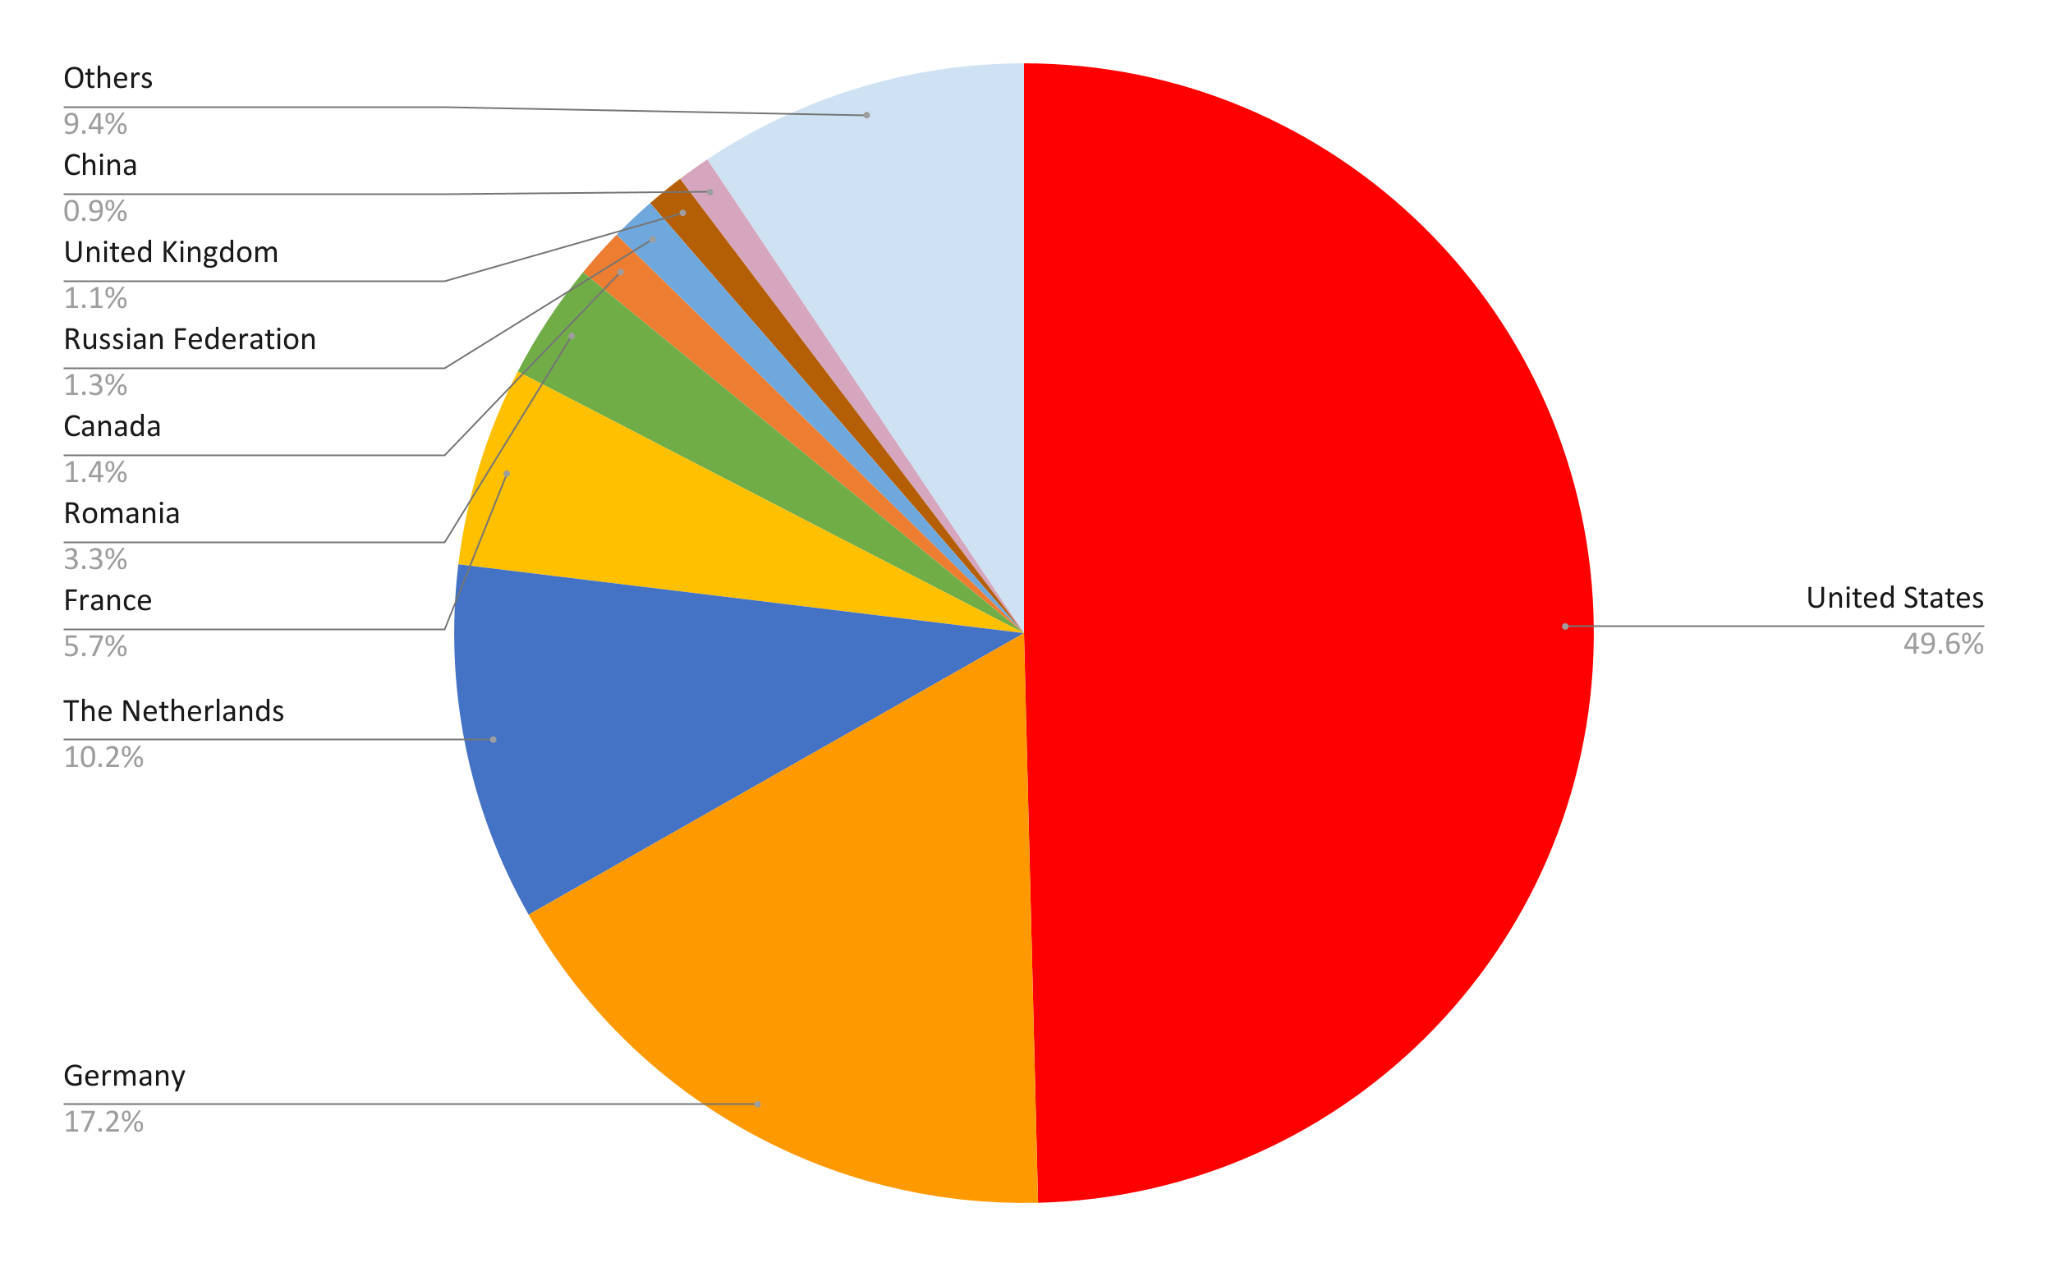 Network security trends pie chart showing locations of observed attacks. United States = 49.6%, Germany = 17.2%, The Netherlands = 10.2%, France = 5.7%, Romania = 3.3%, Canada = 1.4%, Russian Federation = 1.3%, United Kingdom = 1.1%, China = 0.9%, Others = 9.4%